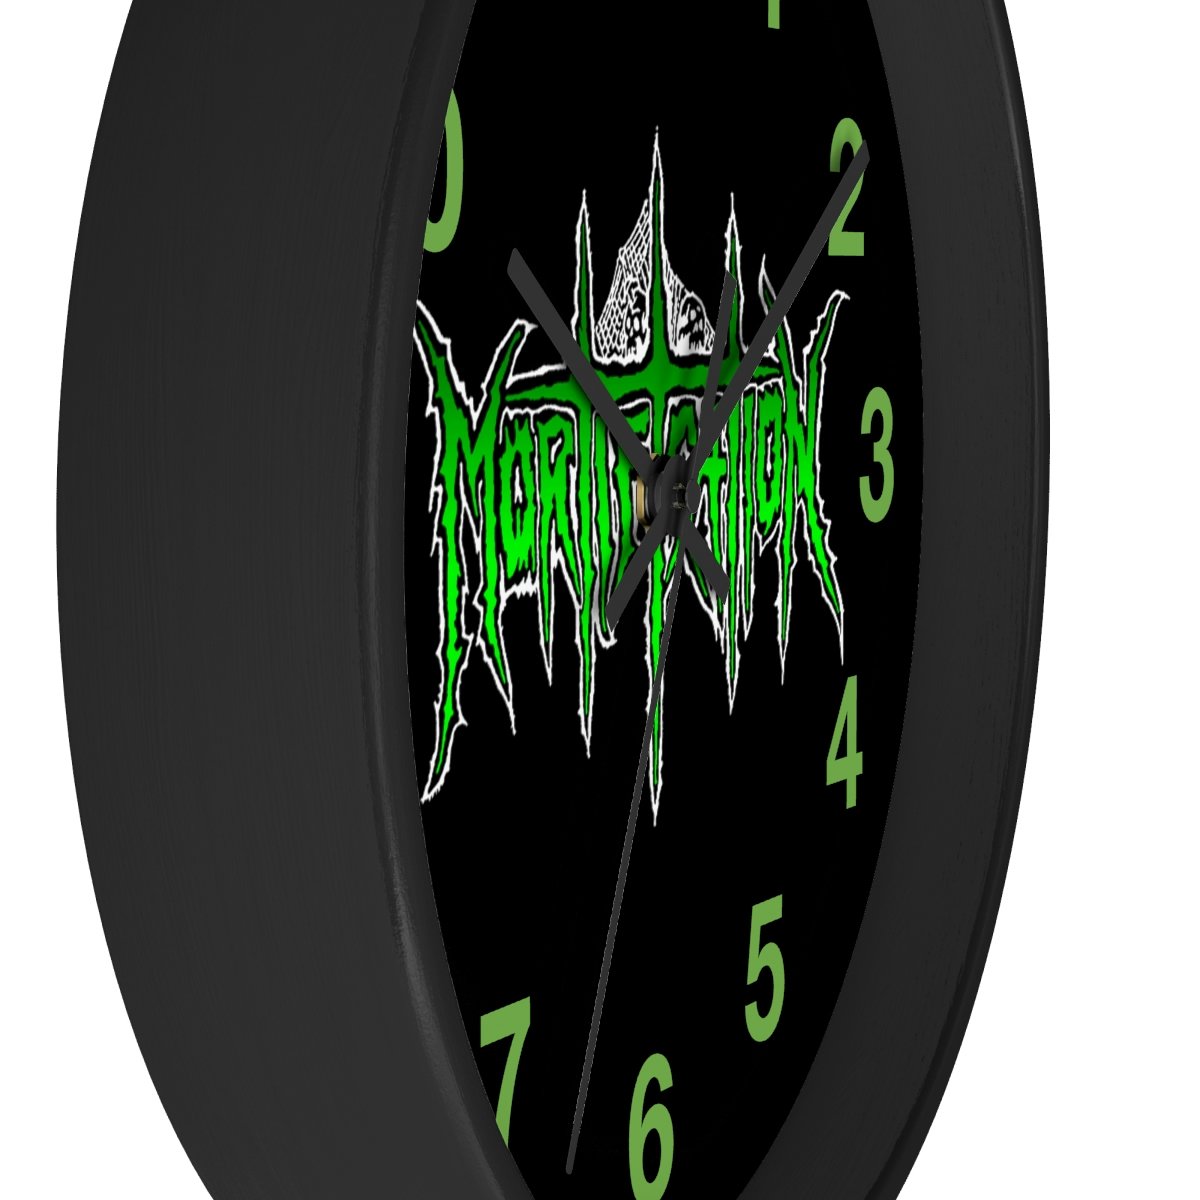 Mortification Logo Green and White Wall clock